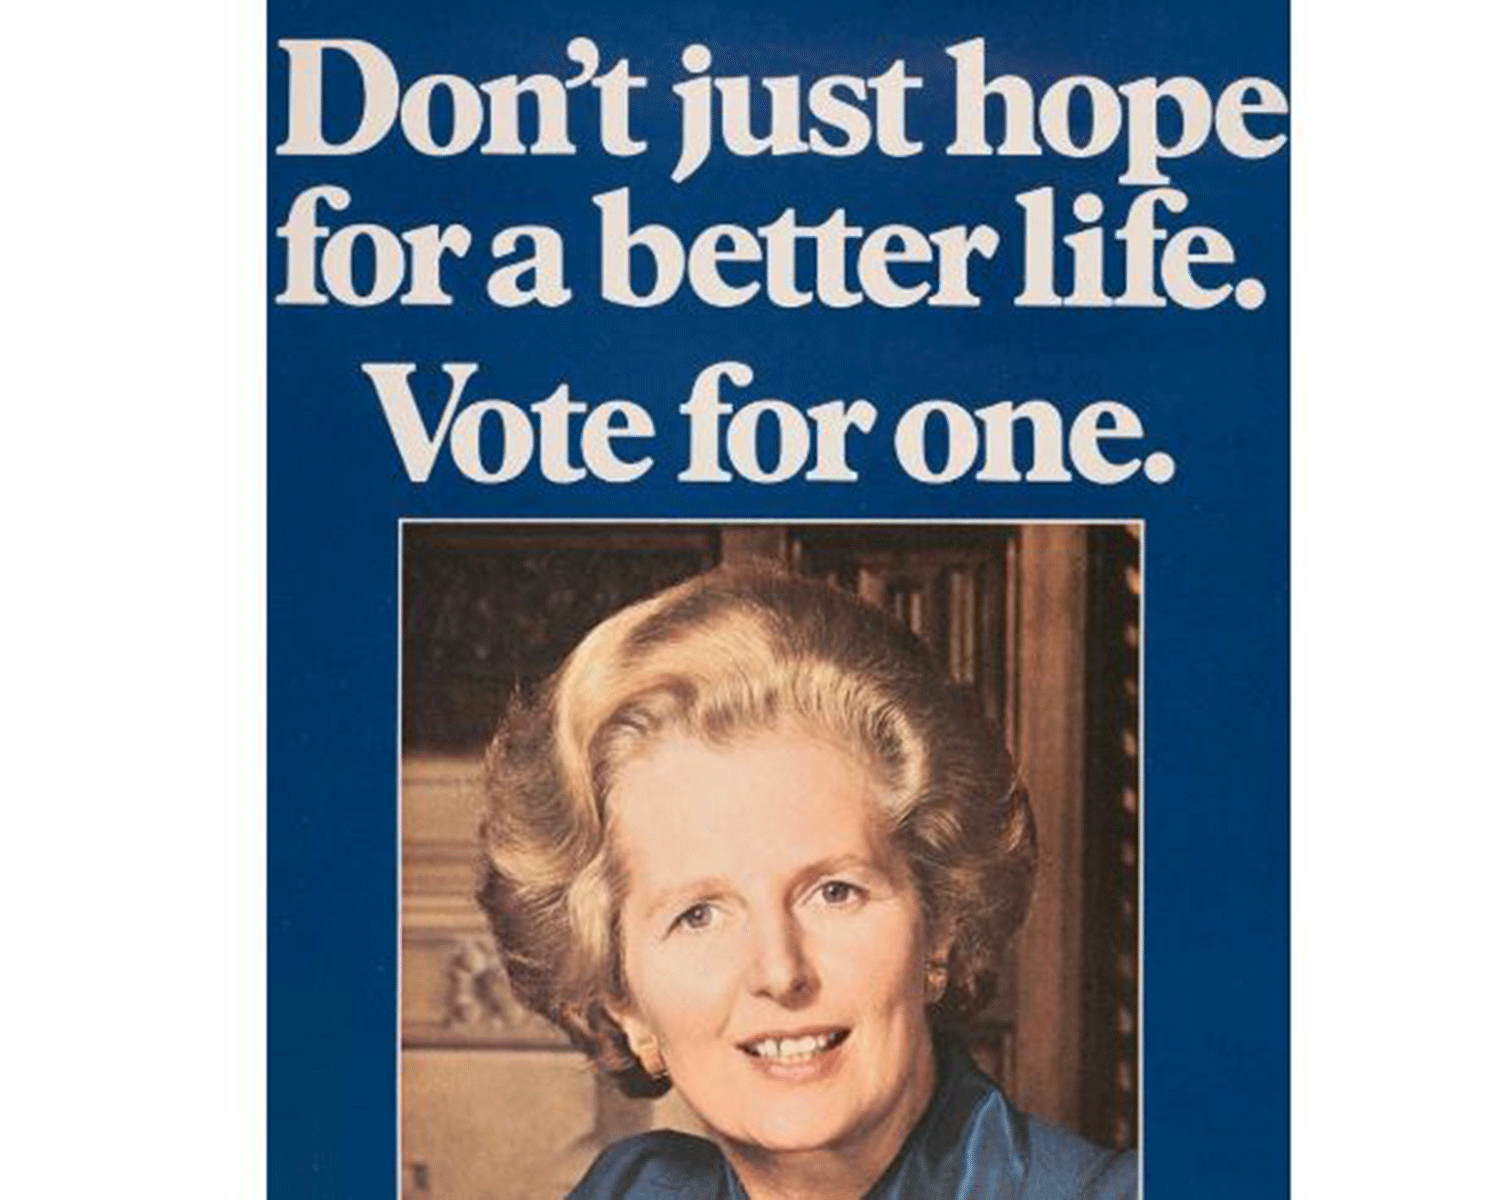 The slogan during an election campaign that saw Mrs Thatcher gain thousands of seats from Labour